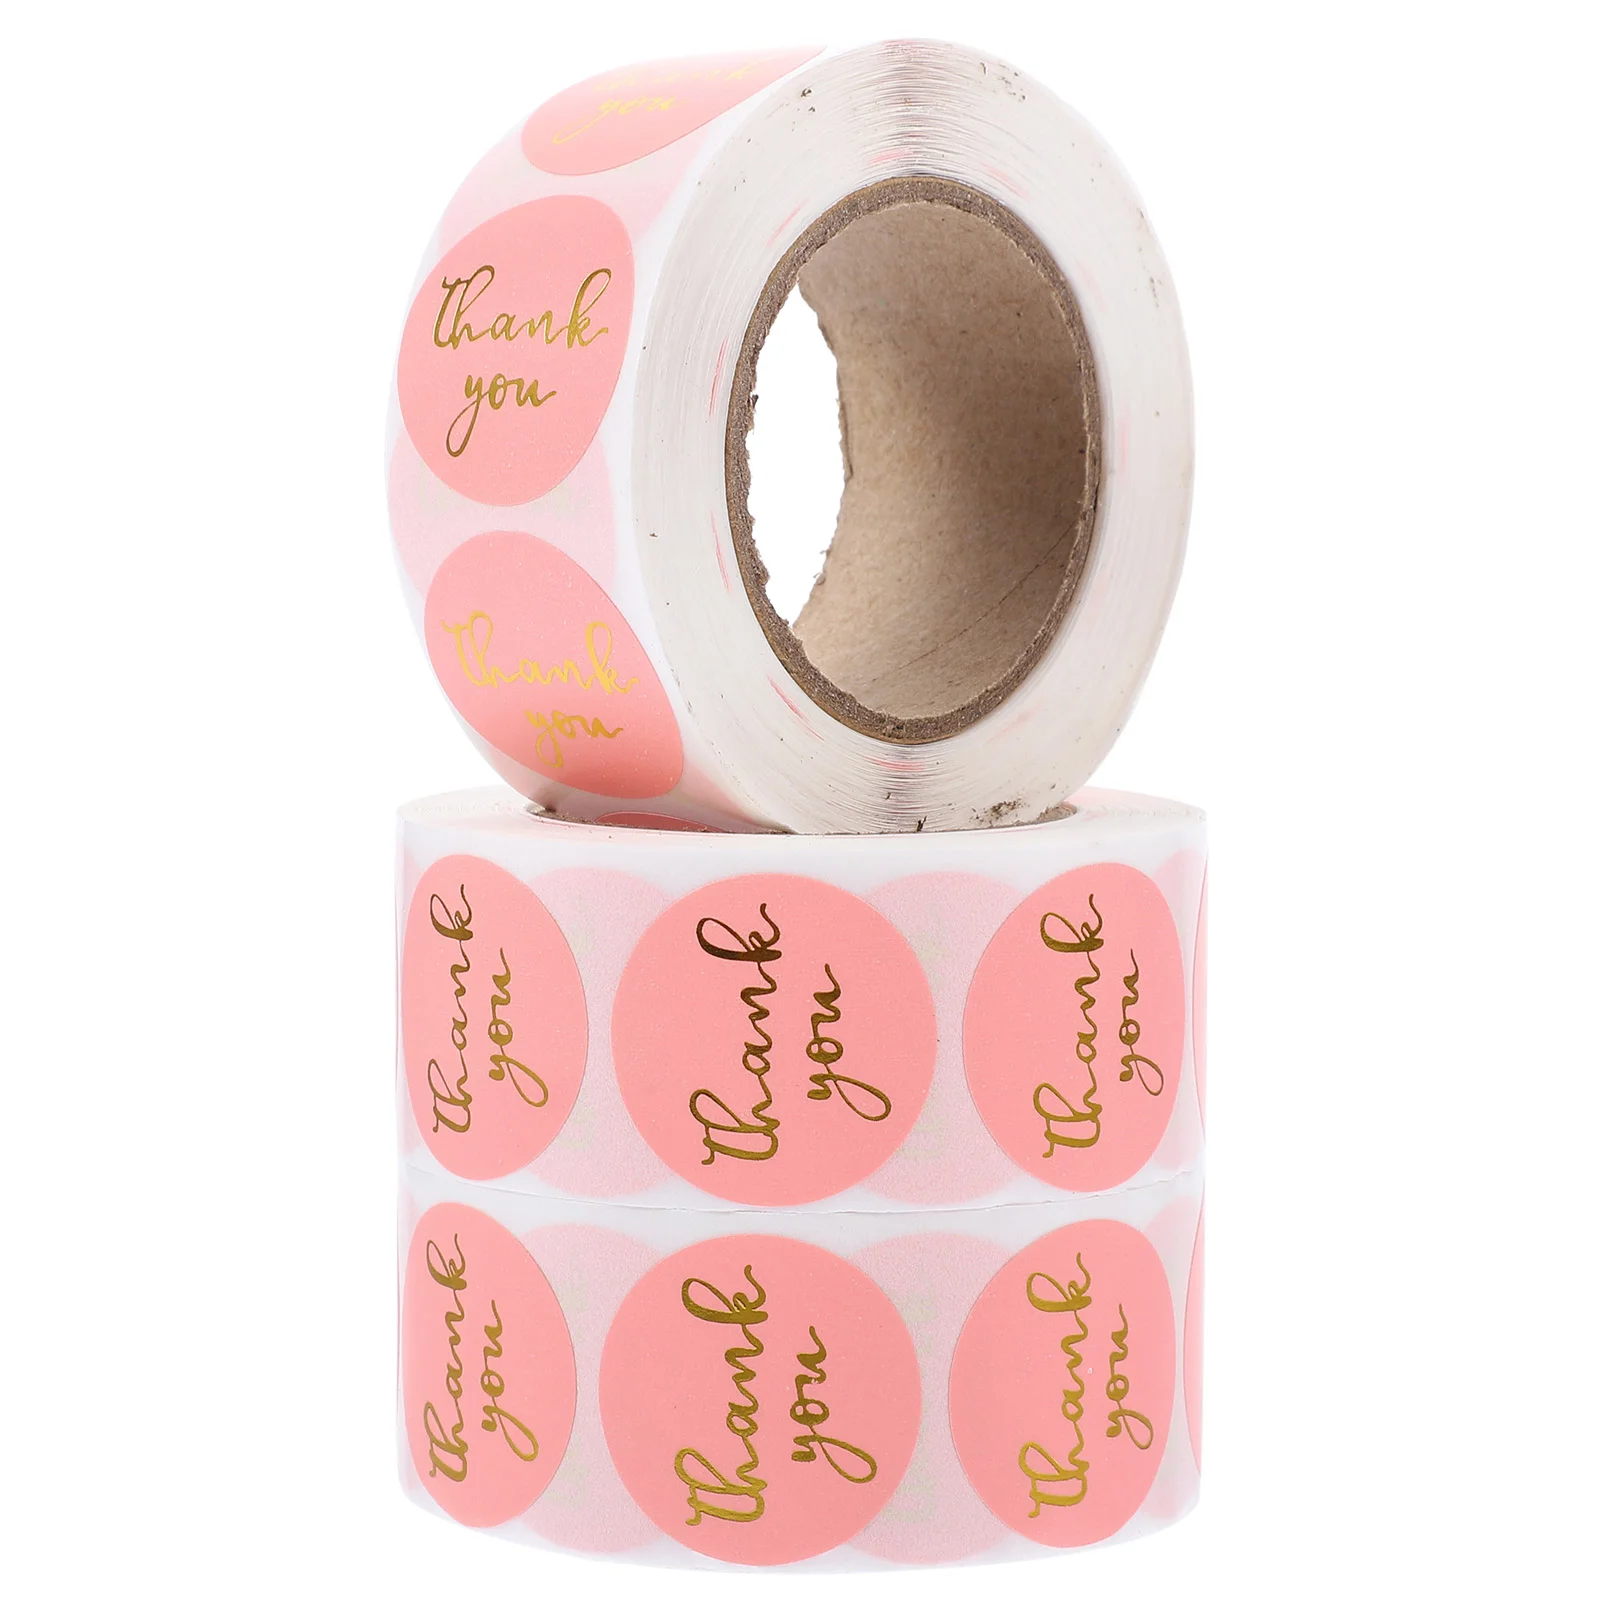 

3 Rolls of Thank Themed Roll Stickers Household Gift Stickers Label Stickers Letter Accessory